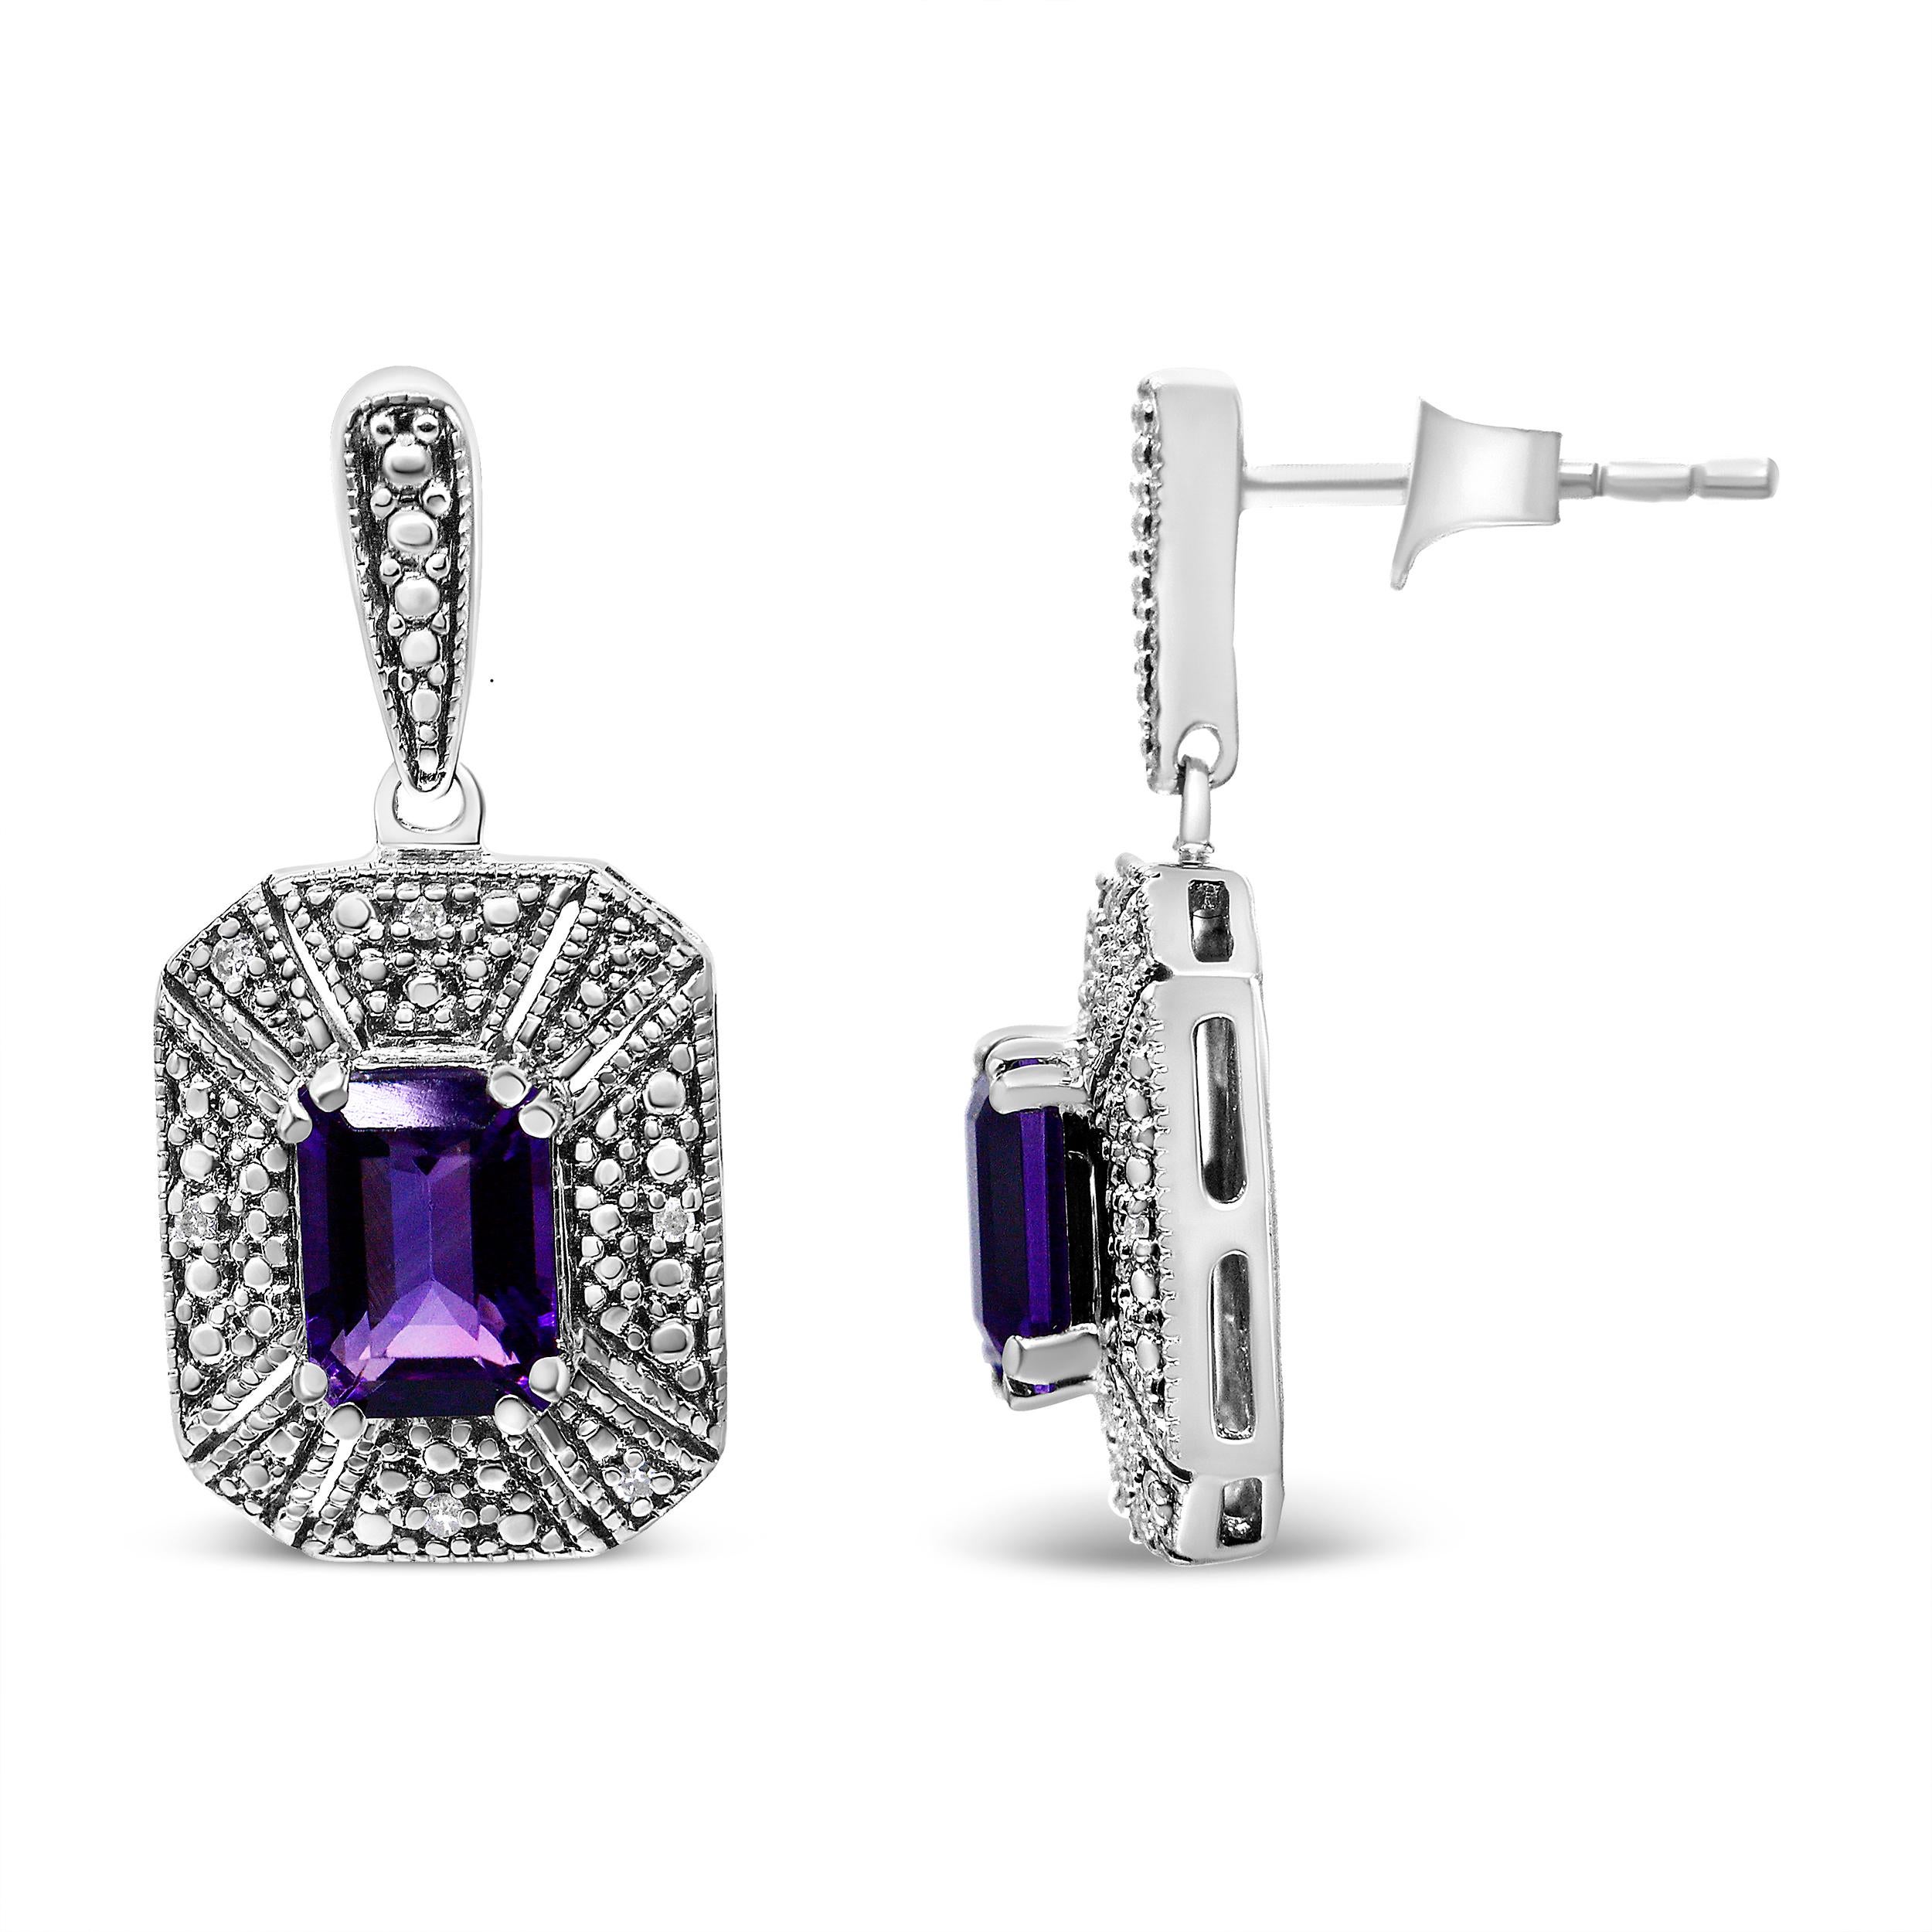 Modern .925 Sterling Silver Diamond Accent and Purple Amethyst Gemstone Stud Earrings For Sale